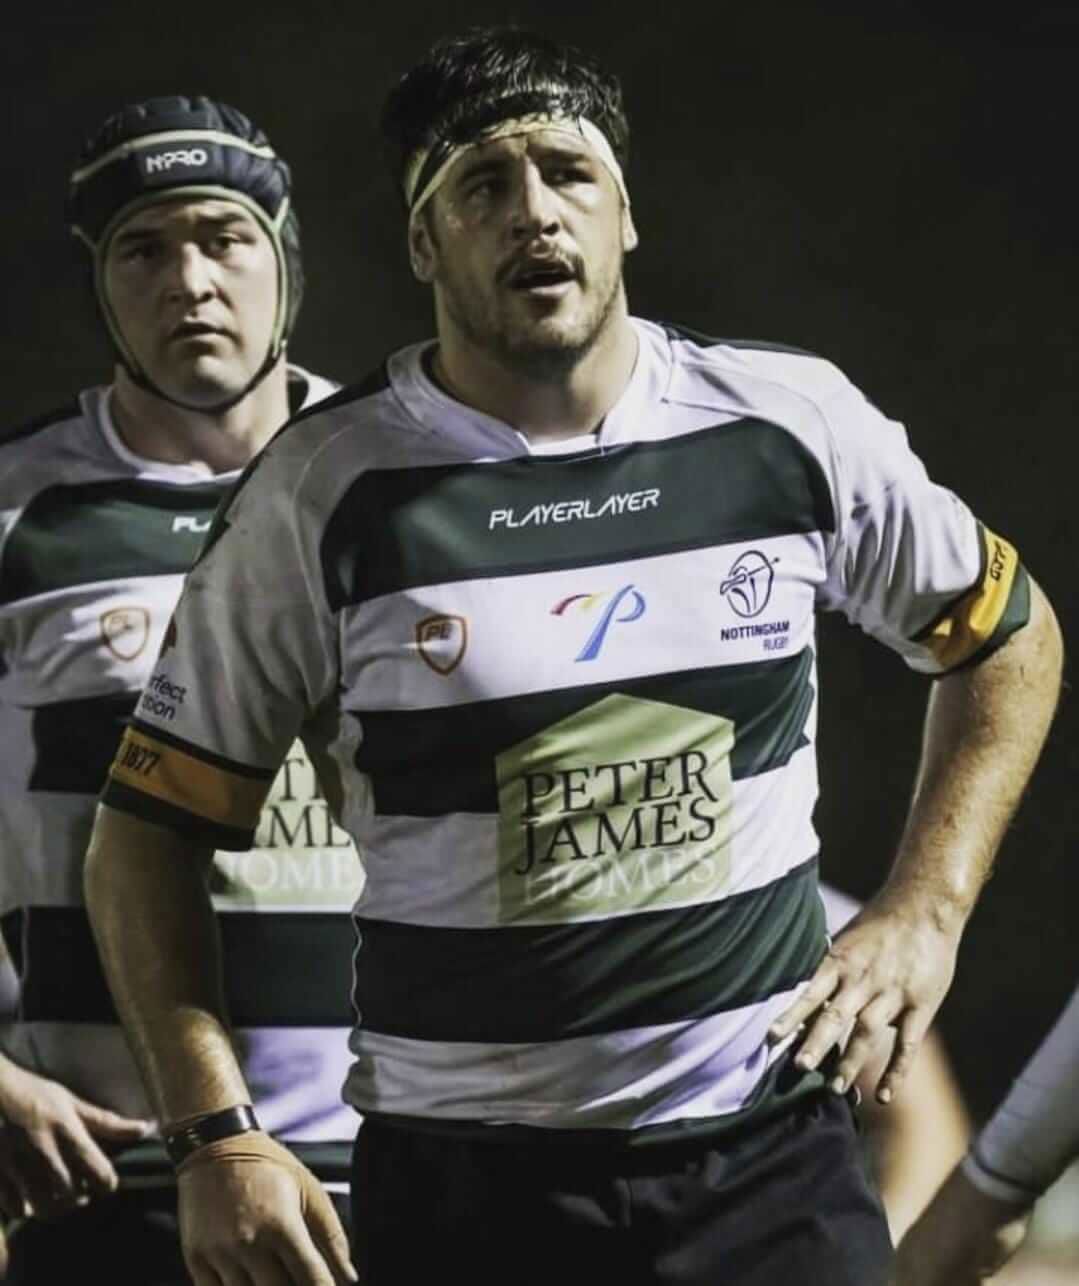 A man playing rugby